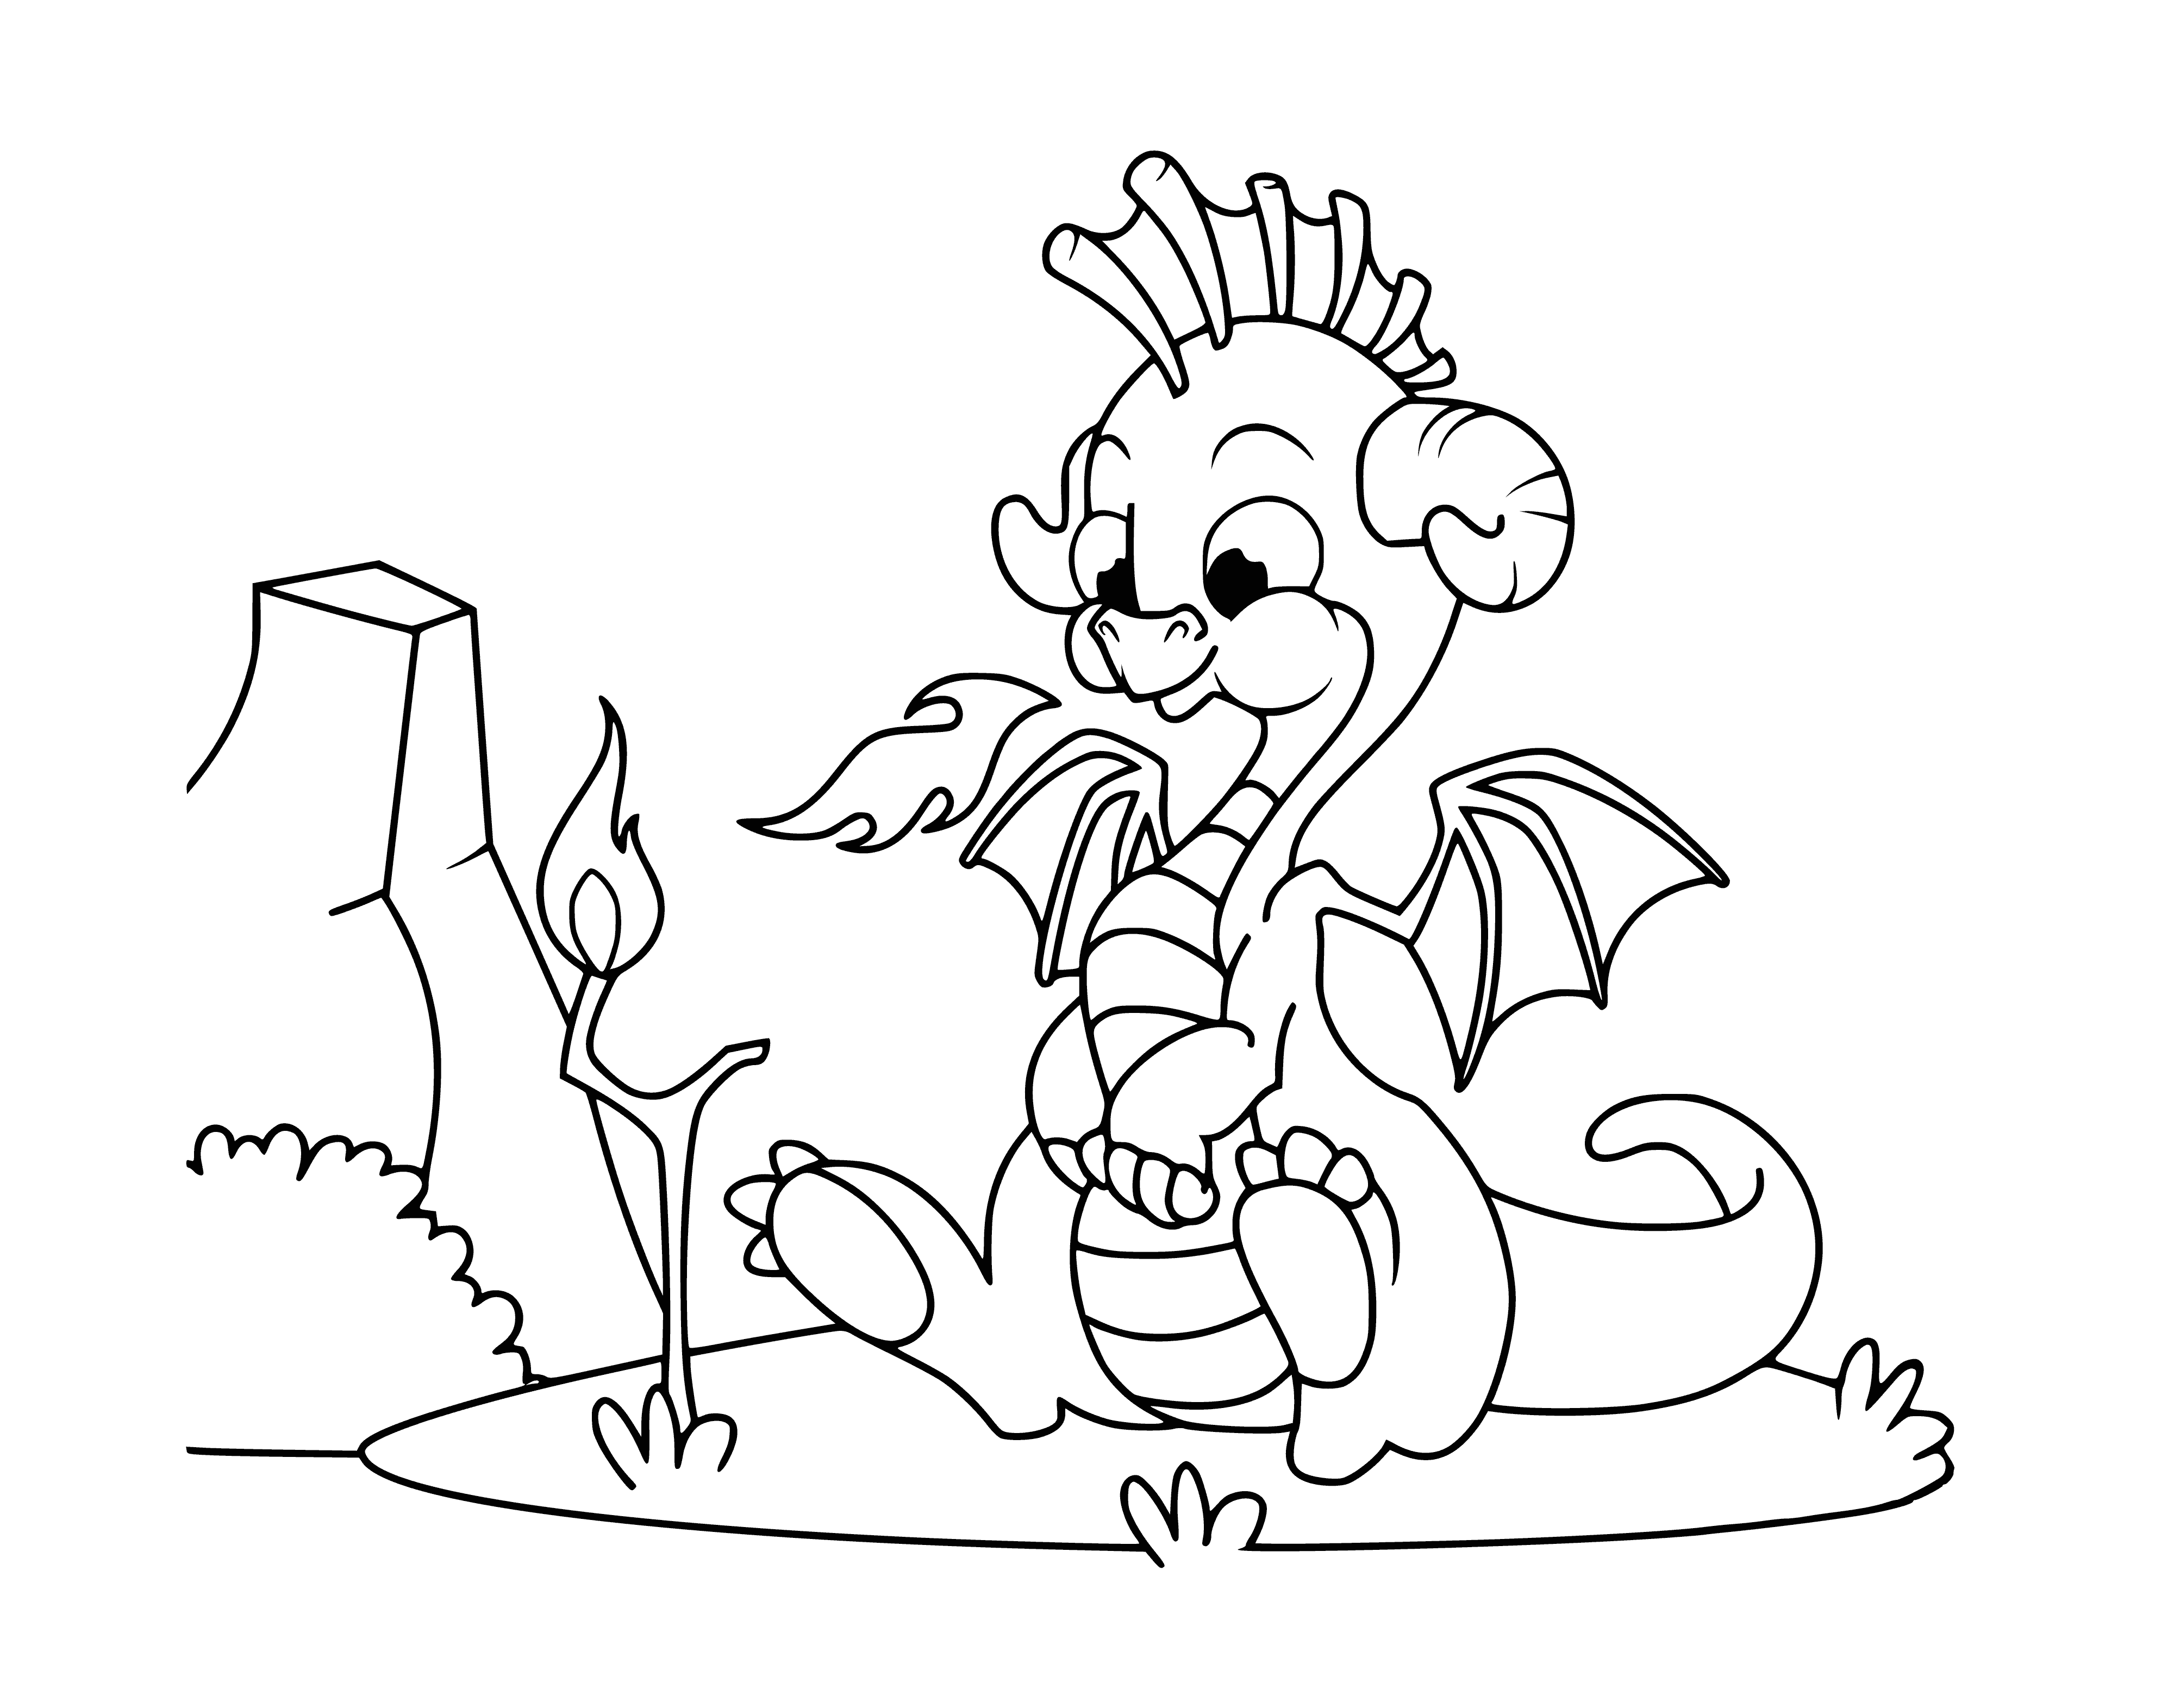 coloring page: Cute little dragon with green spikes, curled tail, and big wings looks friendly. #coloringpages